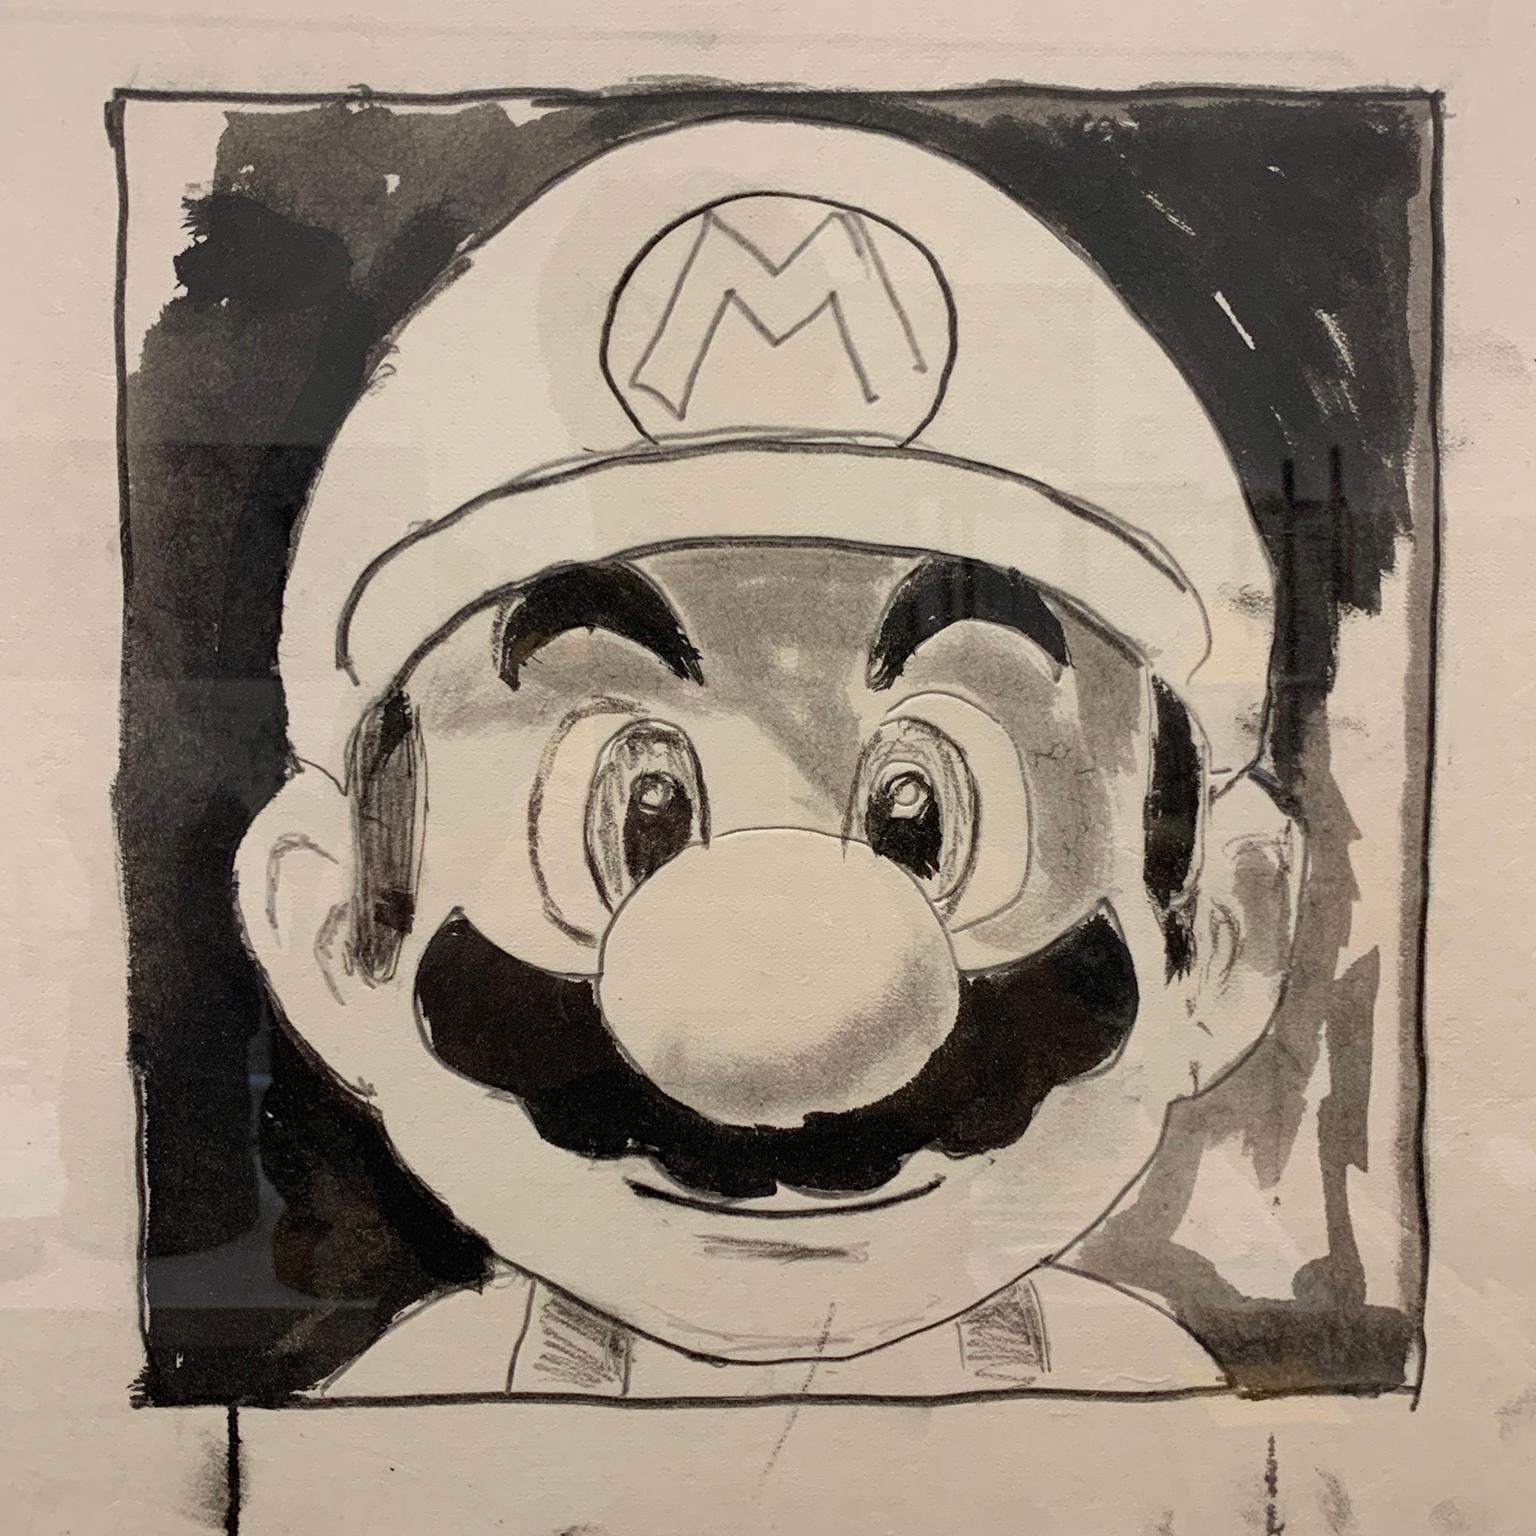 Mario (Grin)
2018
16”x16.5”x1.25” inches
Sumi ink and pencil on Japanese Washi Paper 

Mario, the main character from the Super Mario Bros. video game is one of the most recognizable images and a true archetype of our contemporary society. This